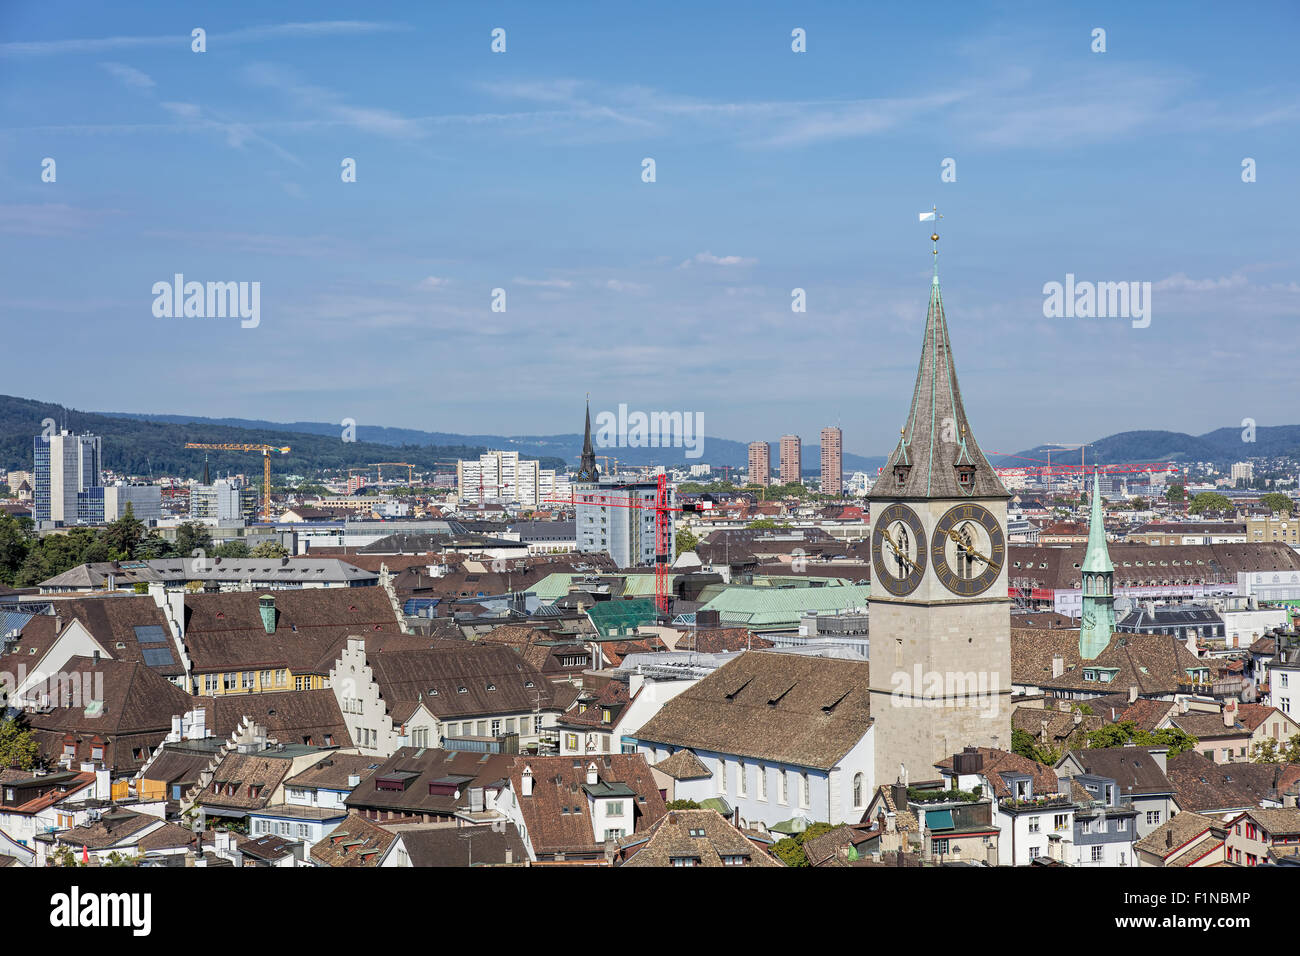 Zurich cityscape - view from the tower of the Grossmunster cathedral with the St. Peter Church in the foreground. Stock Photo